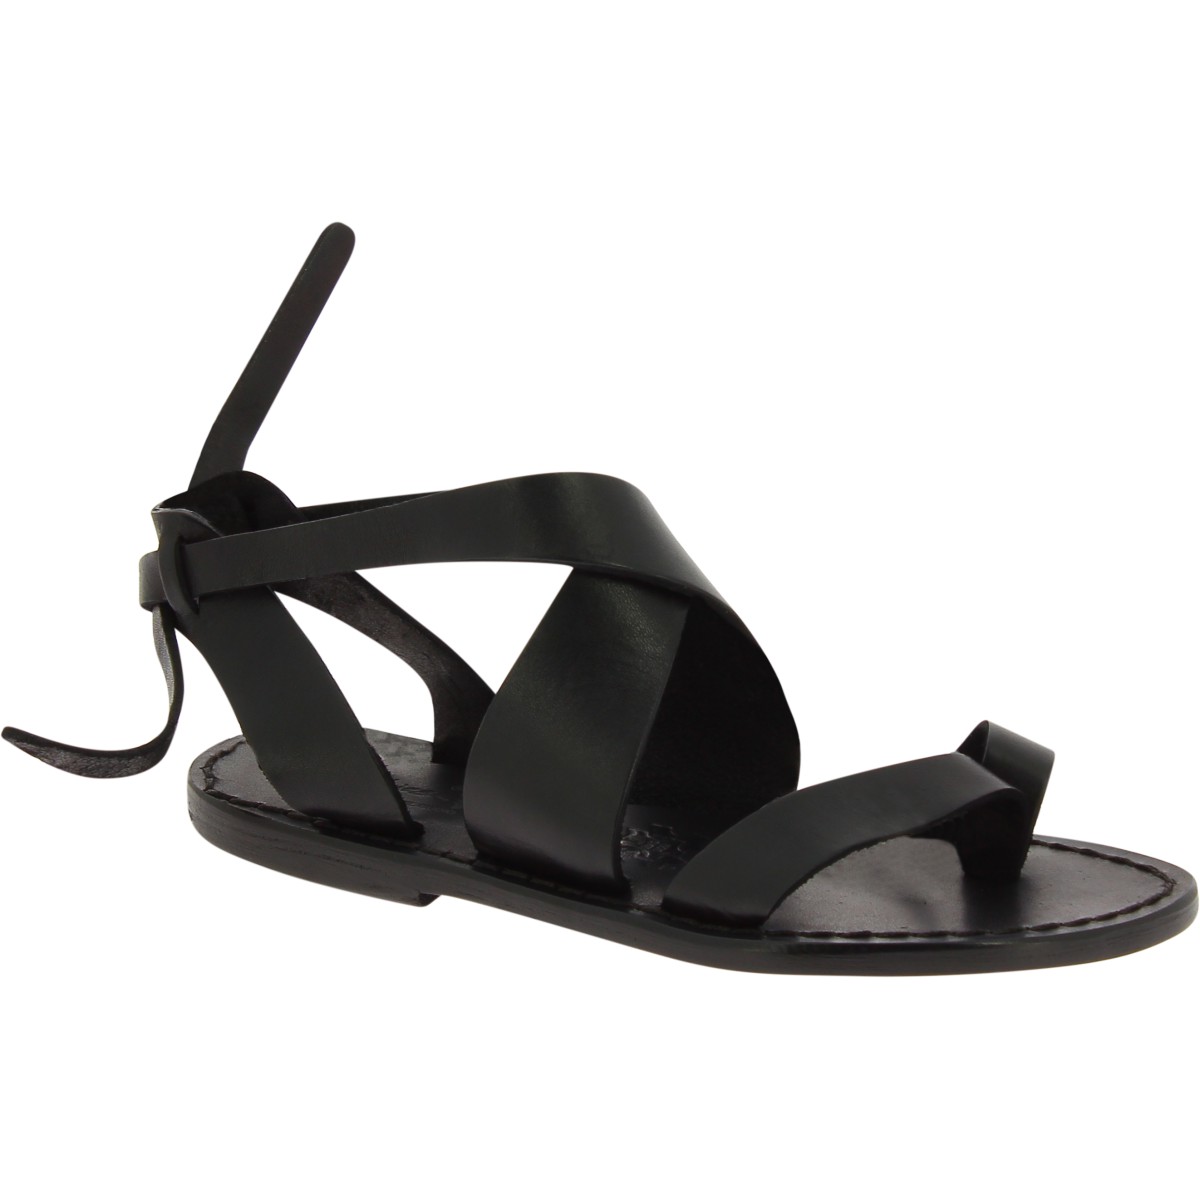 Women's flat black leather sandals handmade in Italy | The leather ...